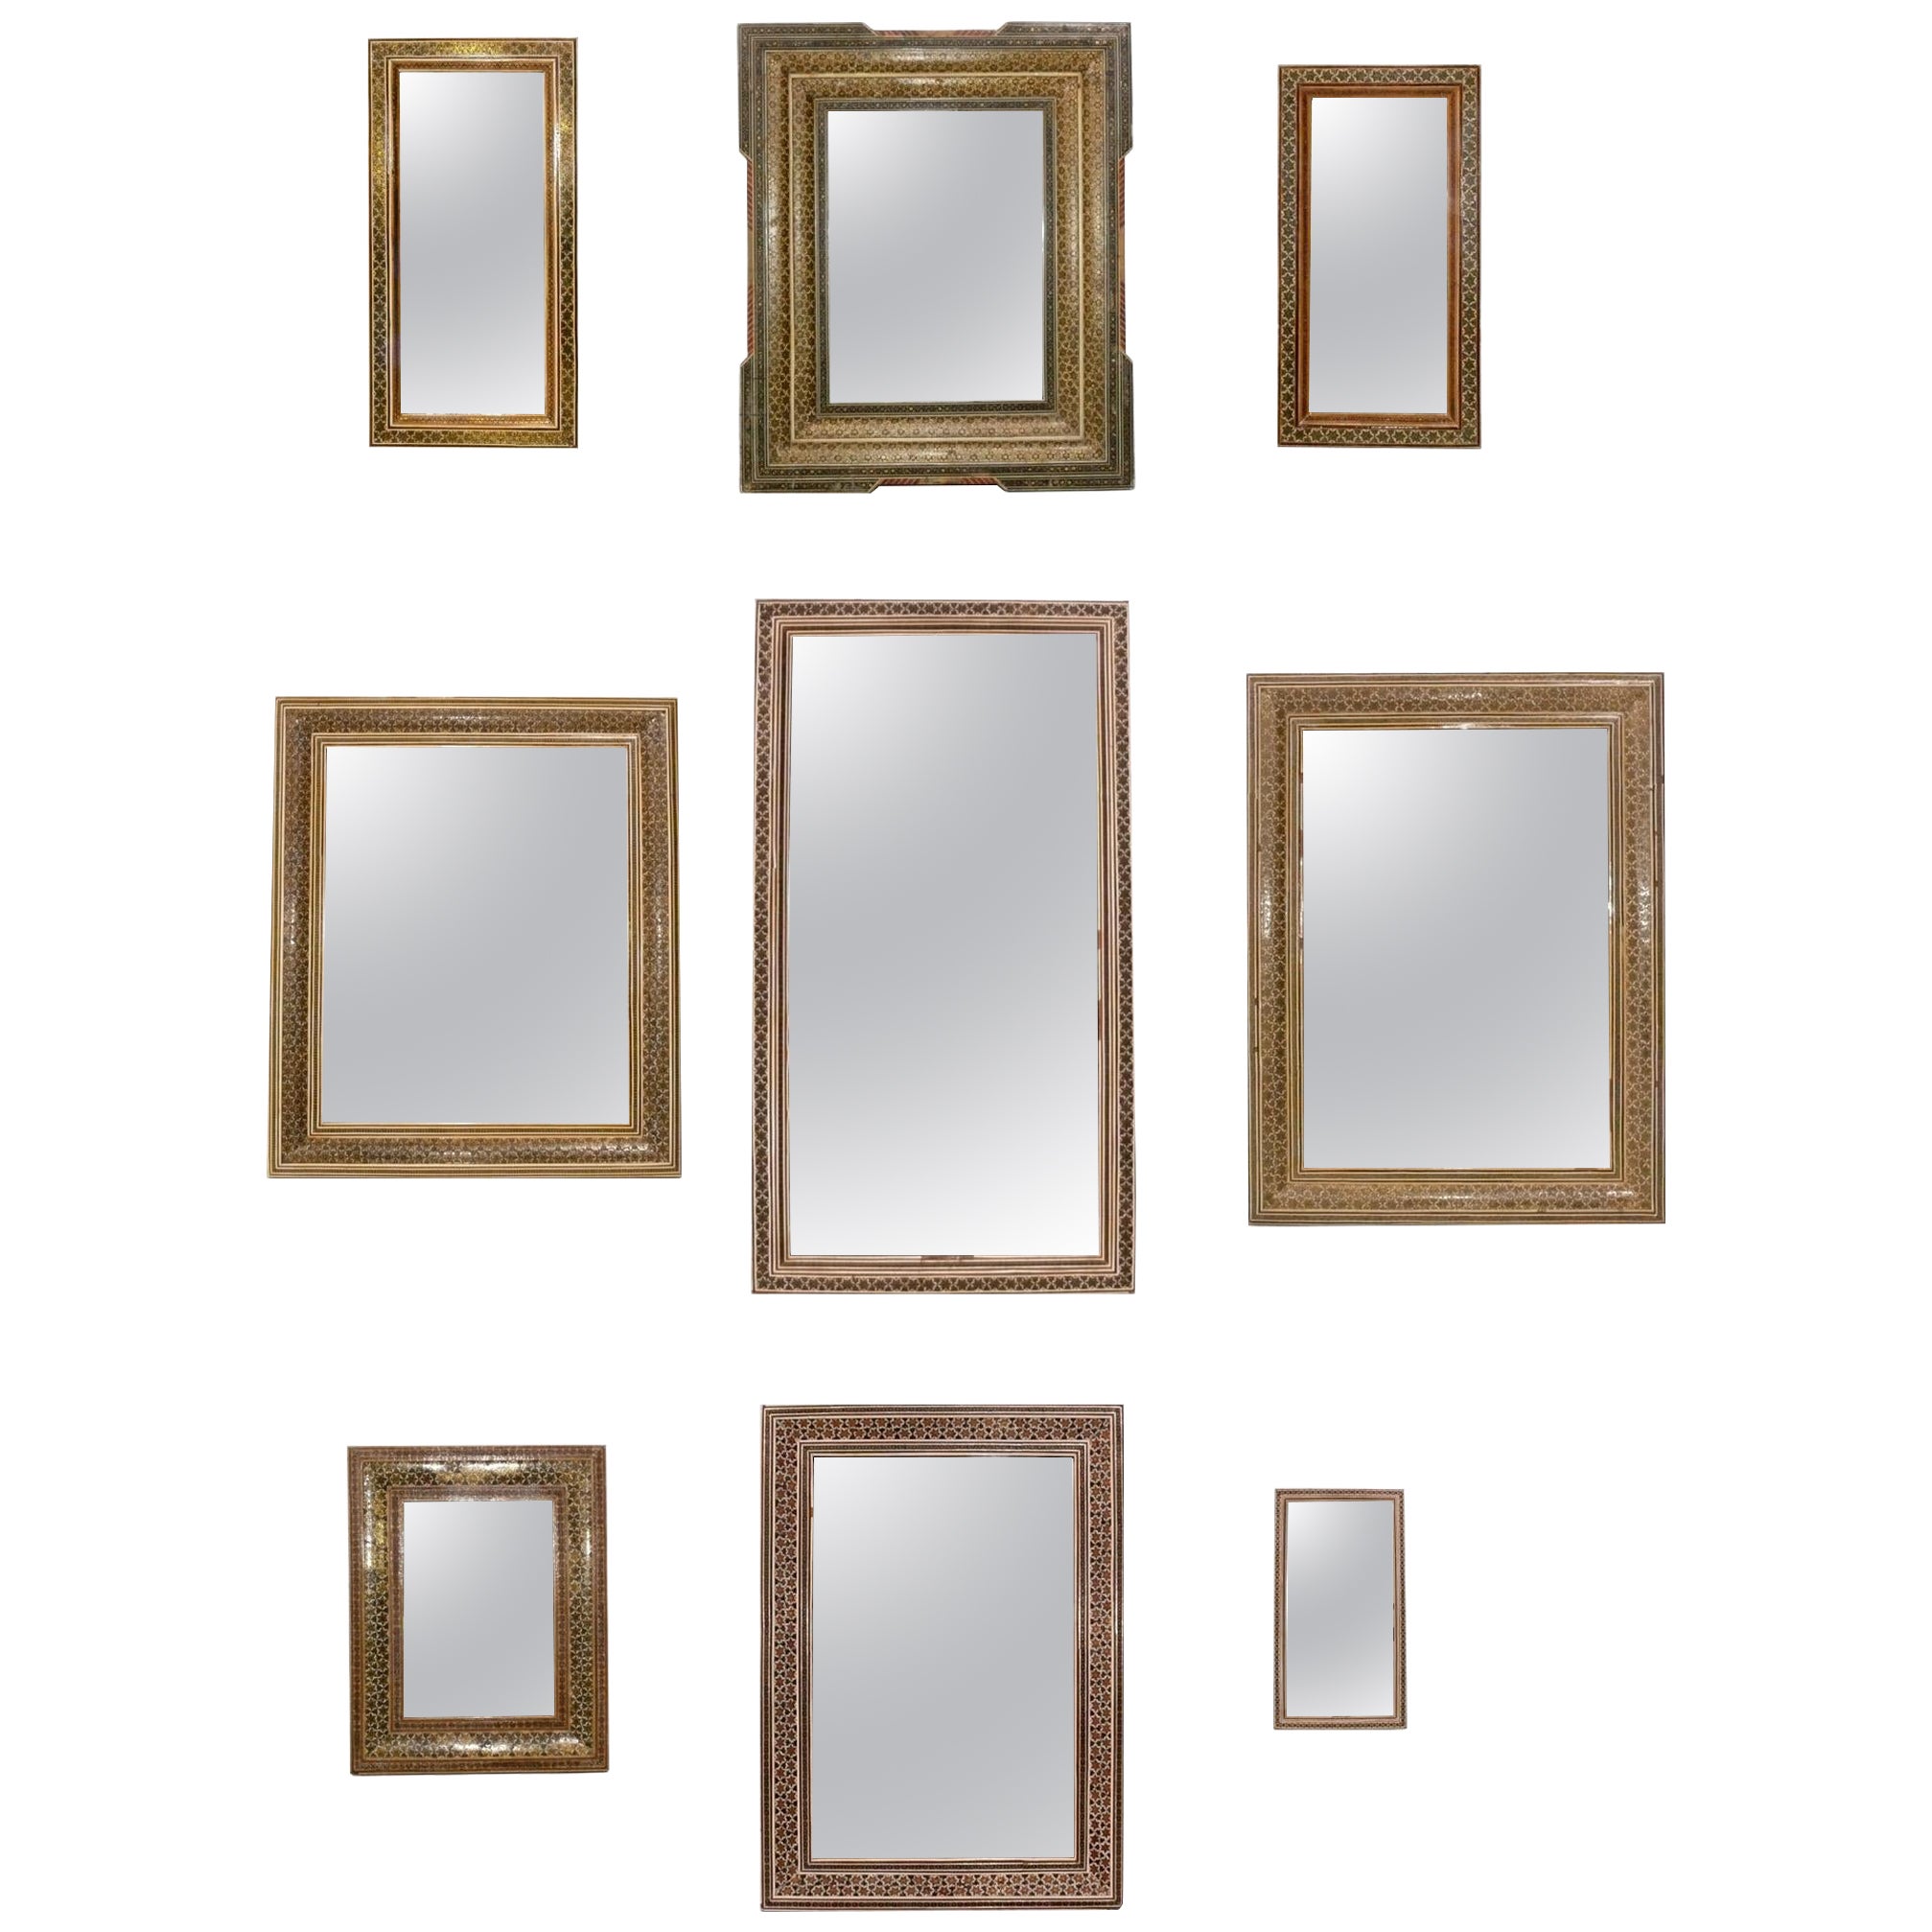 Collection of Hand Inlaid Moroccan Mirrors - Set of Nine